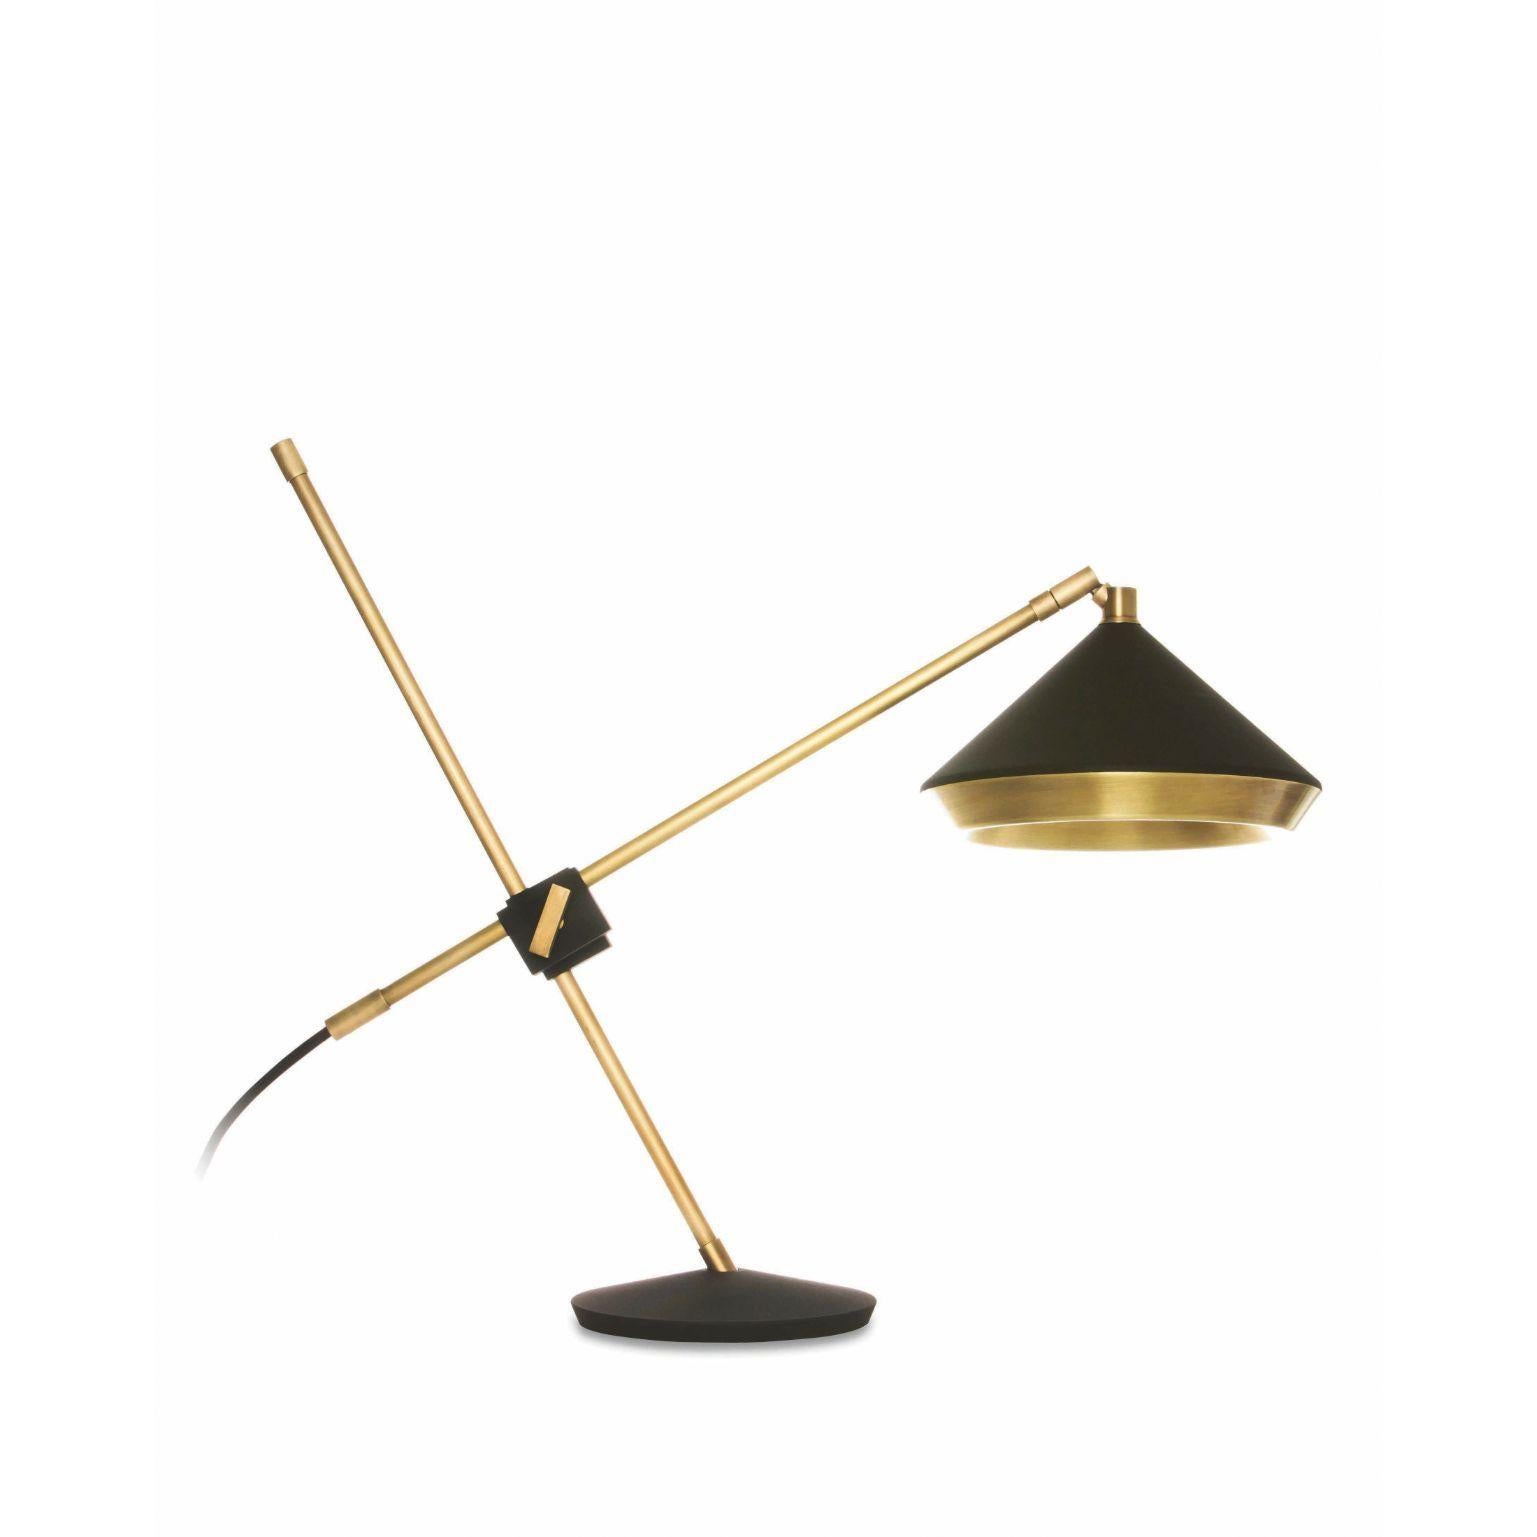 Shear table light - Brass - Black by Bert Frank
Dimensions: 47 x 47 x 15 cm
Materials: Brass

When Adam Yeats and Robbie Llewellyn founded Bert Frank in 2013 it was a meeting of minds and the start of a collaborative creative partnership with